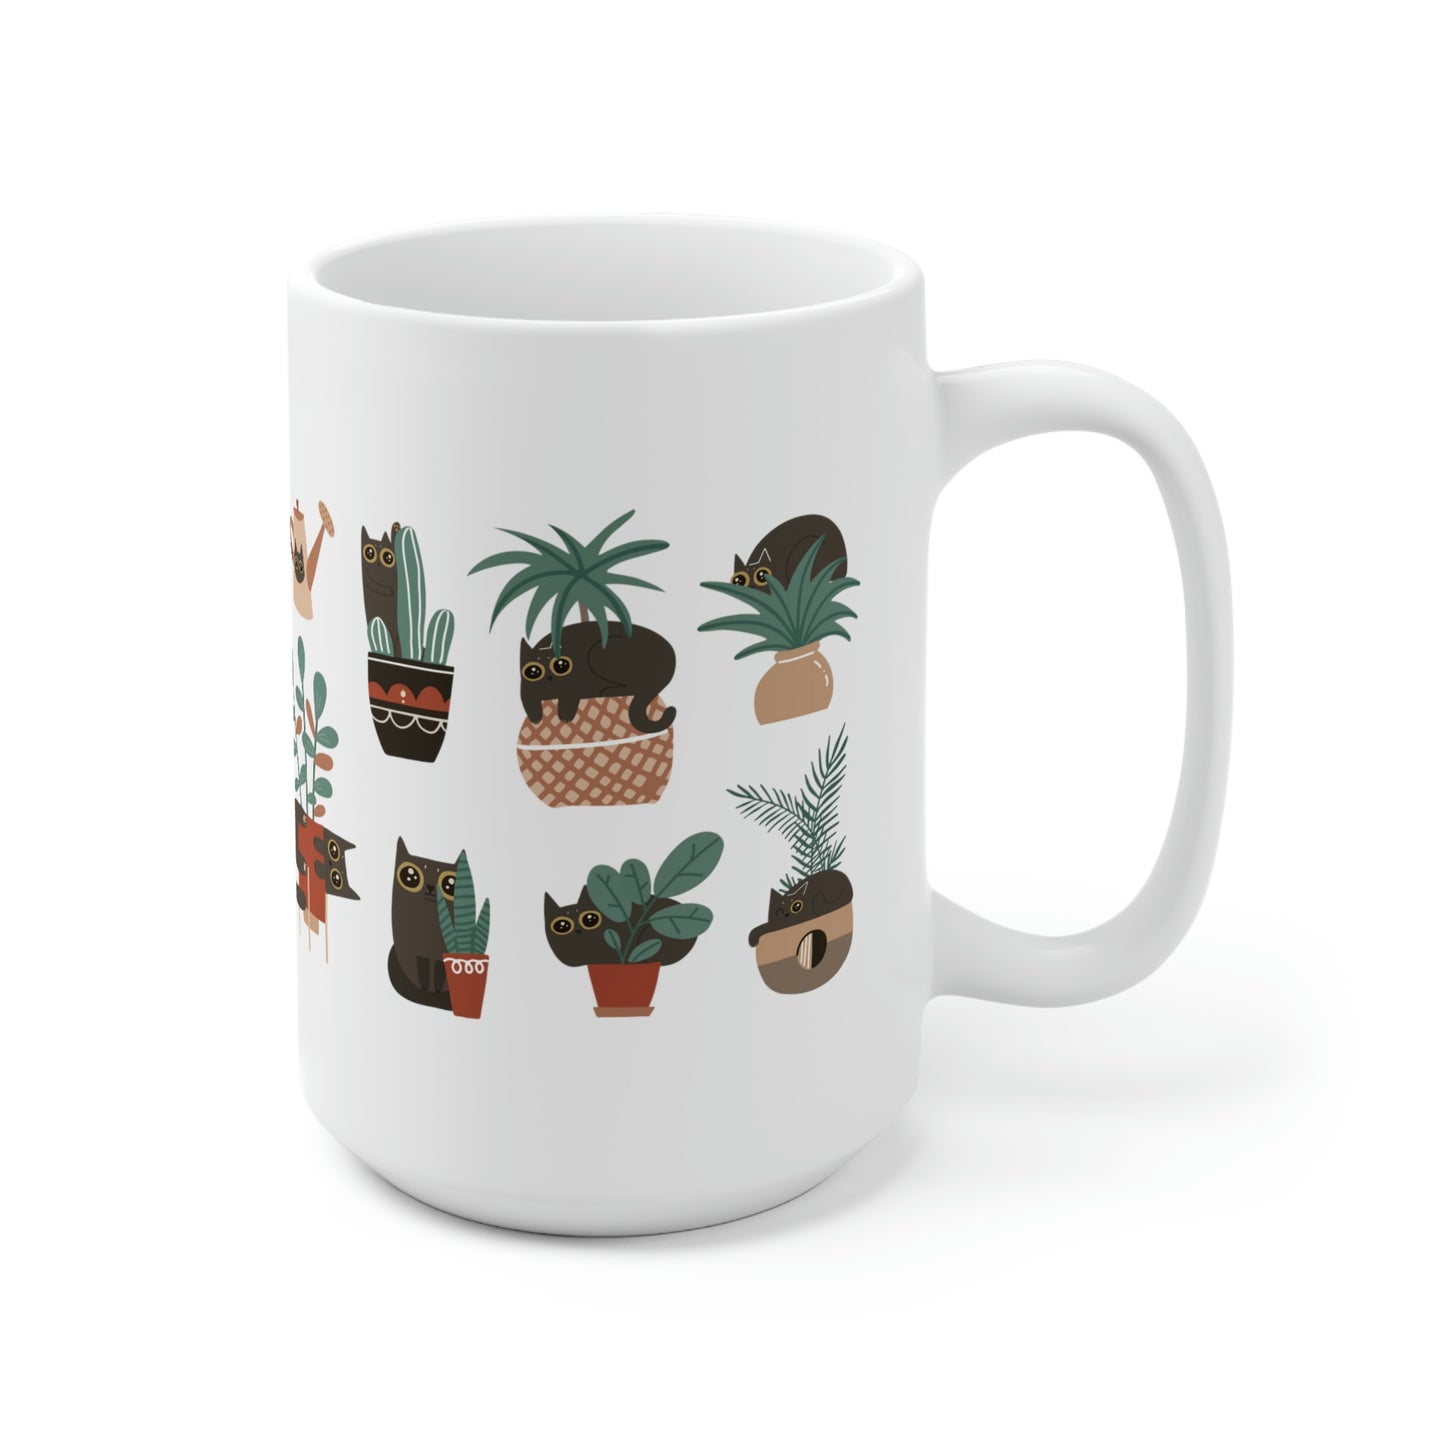 Black cat playing with house plants Ceramic Mug 15oz for catlovers and plant lovers.